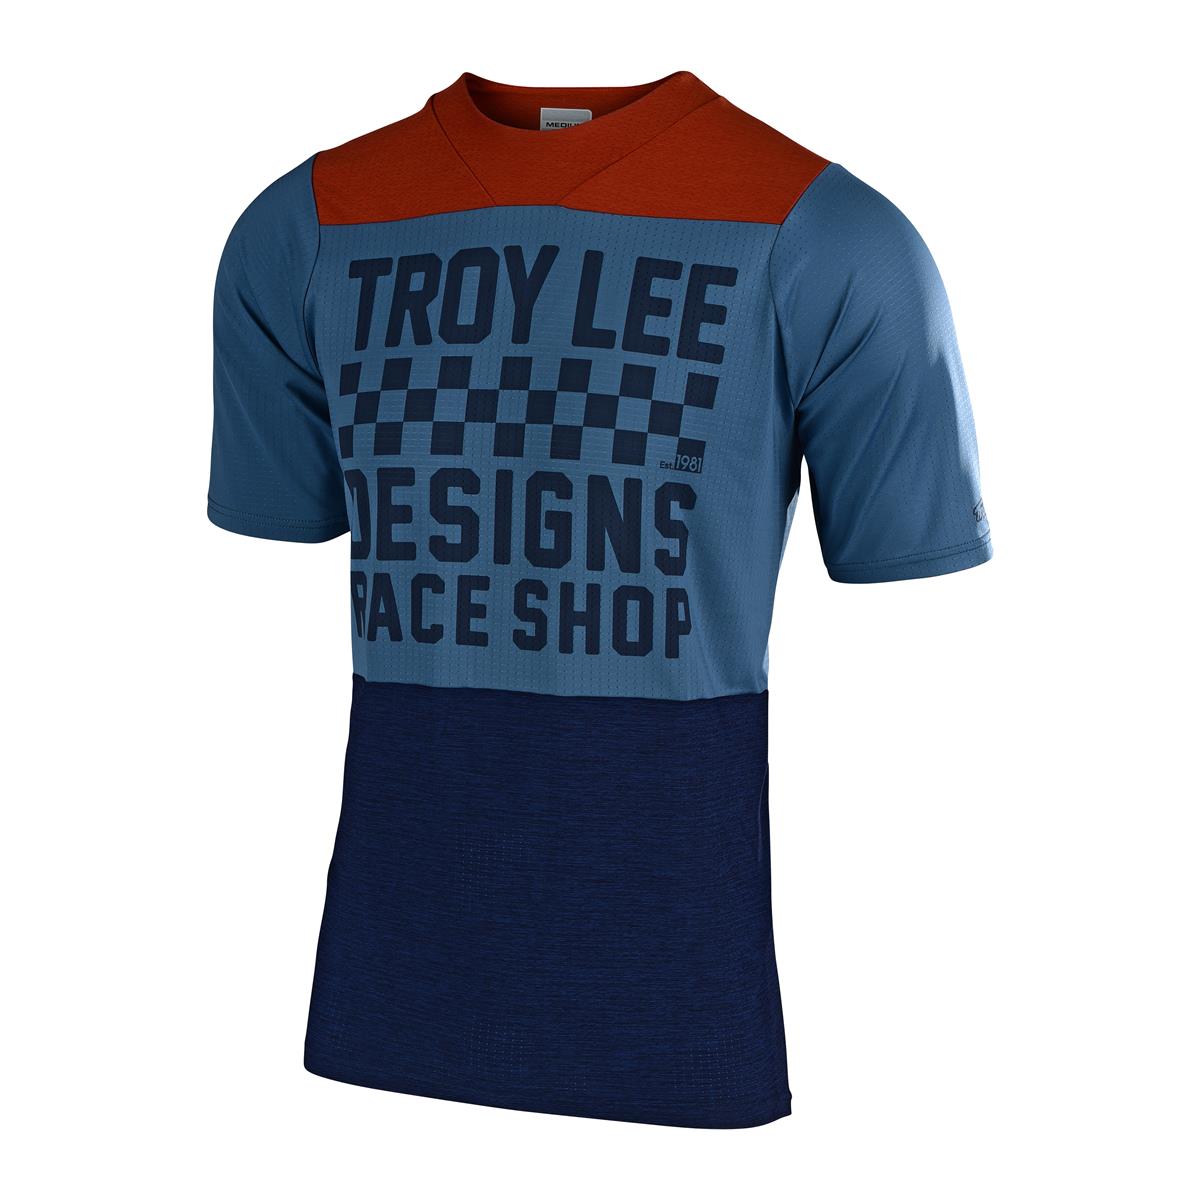 Troy Lee Designs Trail Jersey Skyline Air Checkers - Heather Clay/Cadet